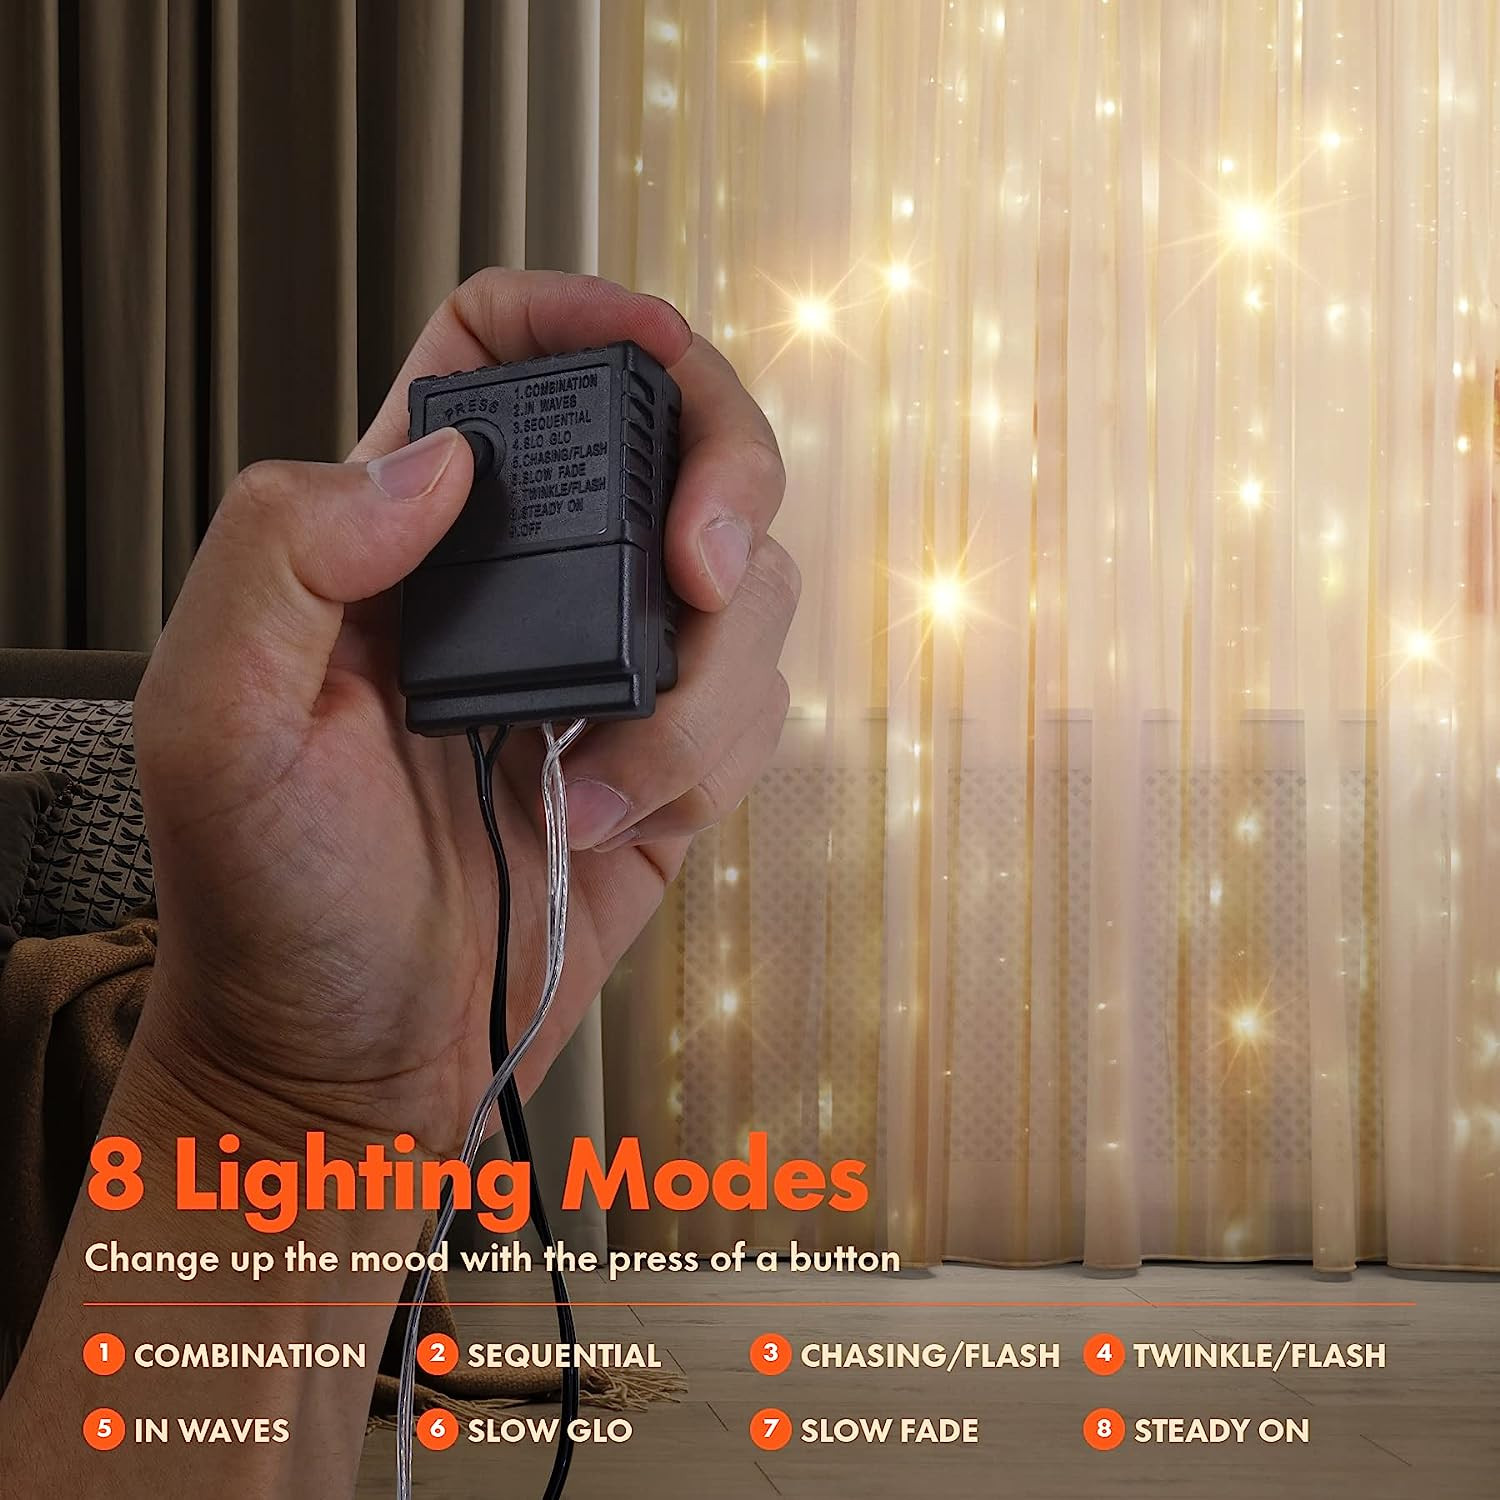 Kuber Industries Curtain Lights with 300 LED | 10 Strings Jharna Lights for Diwali | Christmas | Home Decoration |Indoor & Outdoor Décor | Warm White